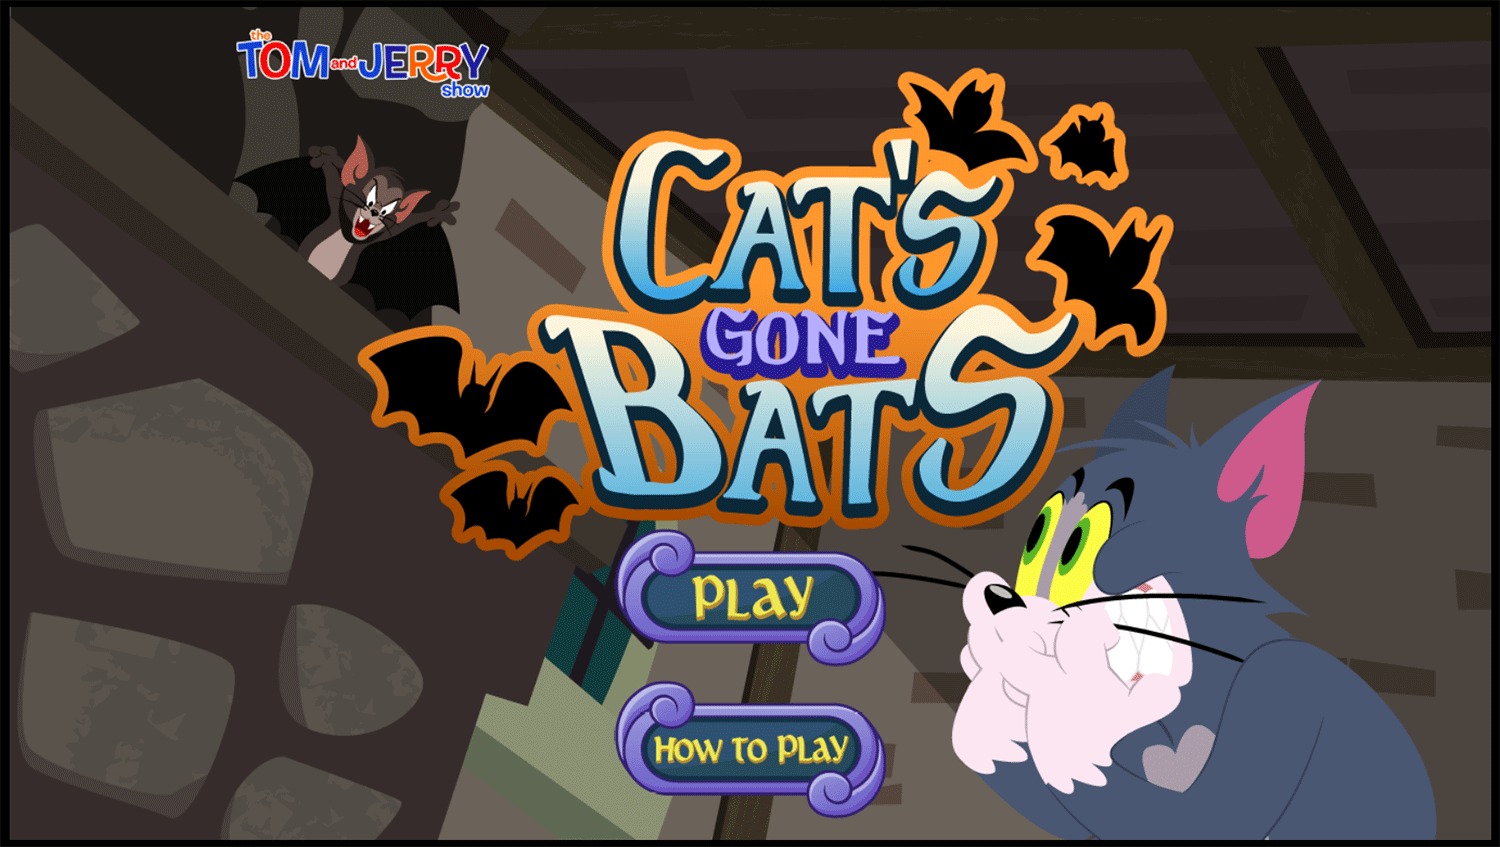 Tom and Jerry Cats Gone Bats Welcome Screen Screenshots.